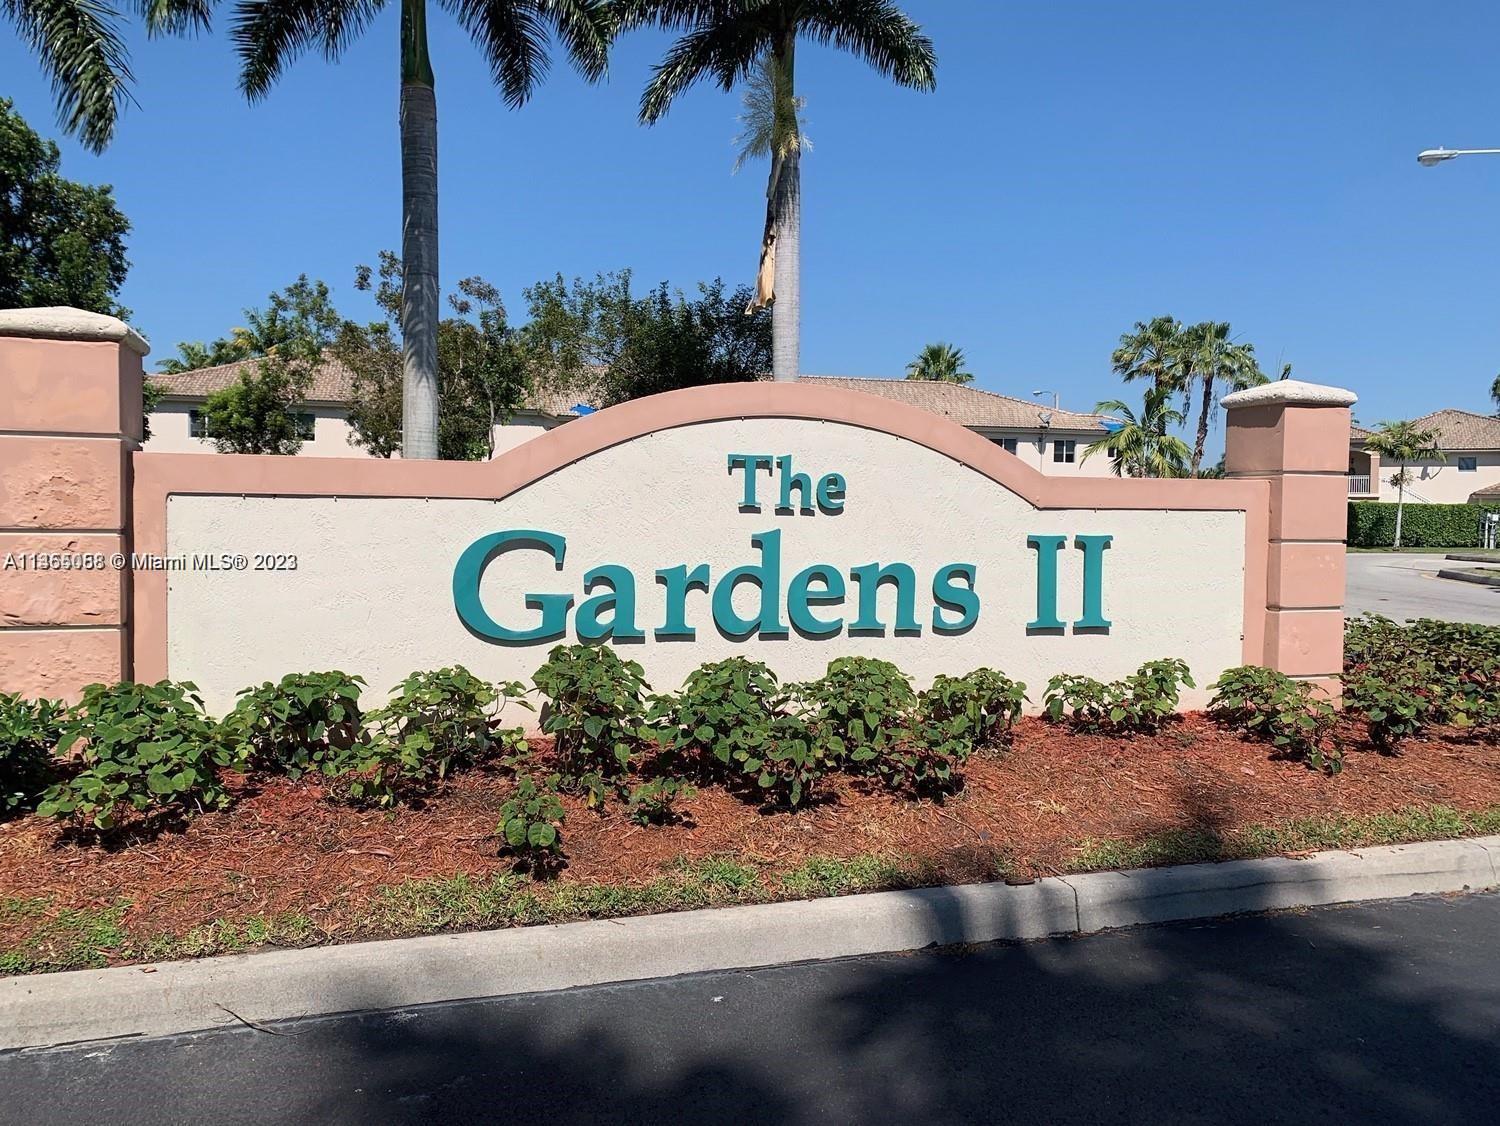 Great apartment in a well-kept gated community of Venetia Gardens. First floor!!! Title floors throughout, washer/dryer inside the property. Recently painted. Excellent condition. Ready to move. EASY SHOWING on lock box.